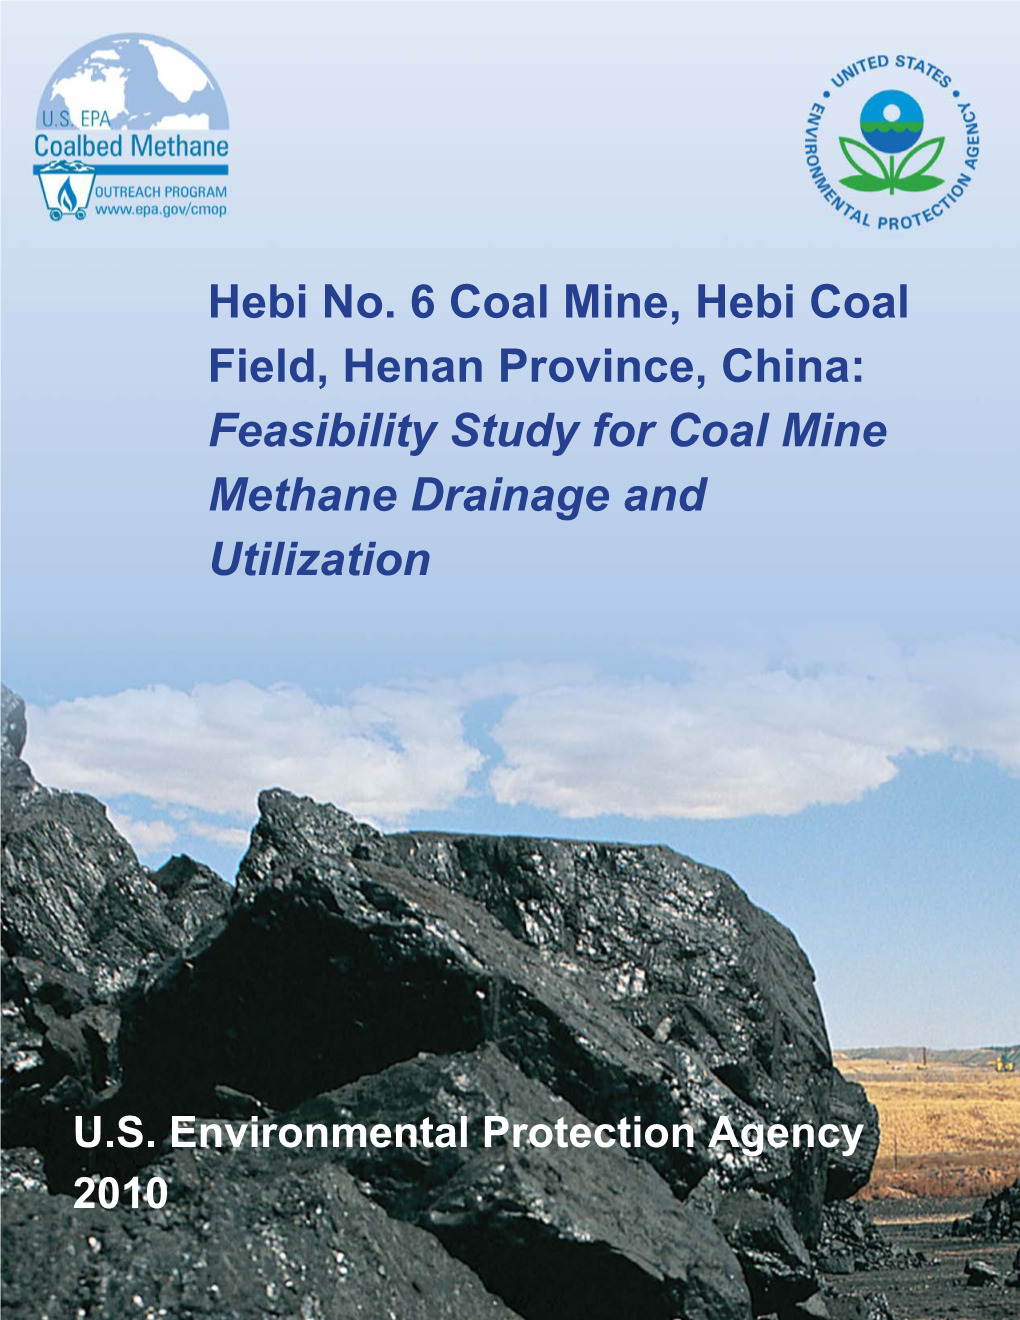 Feasibility Study for Coal Mine Methane Drainage and Utilization